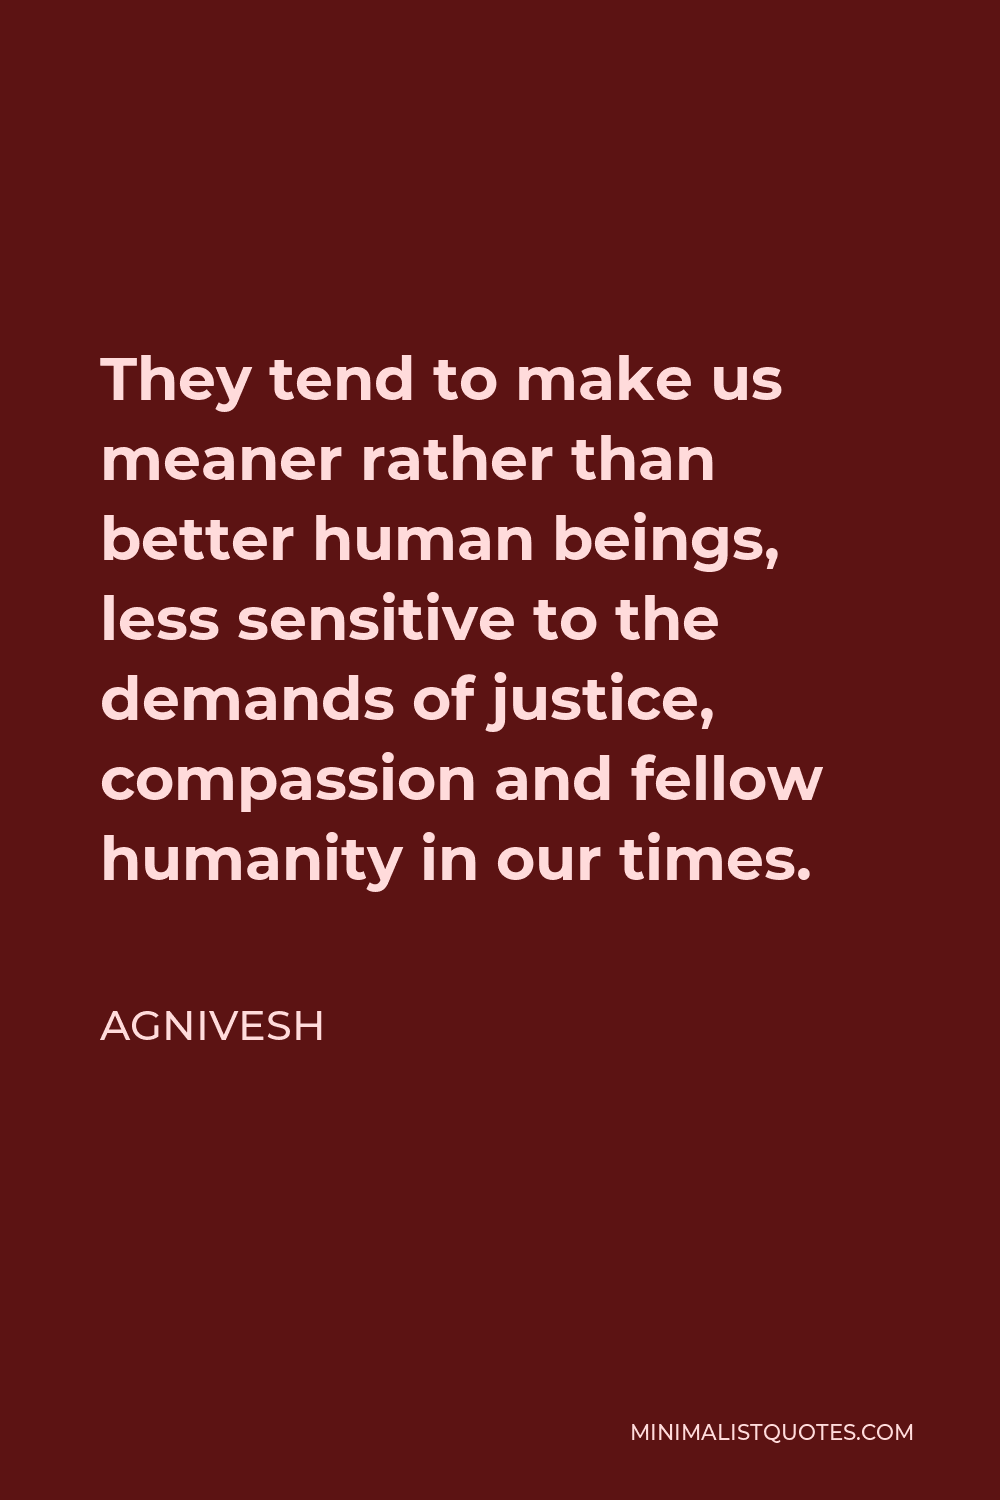 Agnivesh Quote - They tend to make us meaner rather than better human beings, less sensitive to the demands of justice, compassion and fellow humanity in our times.